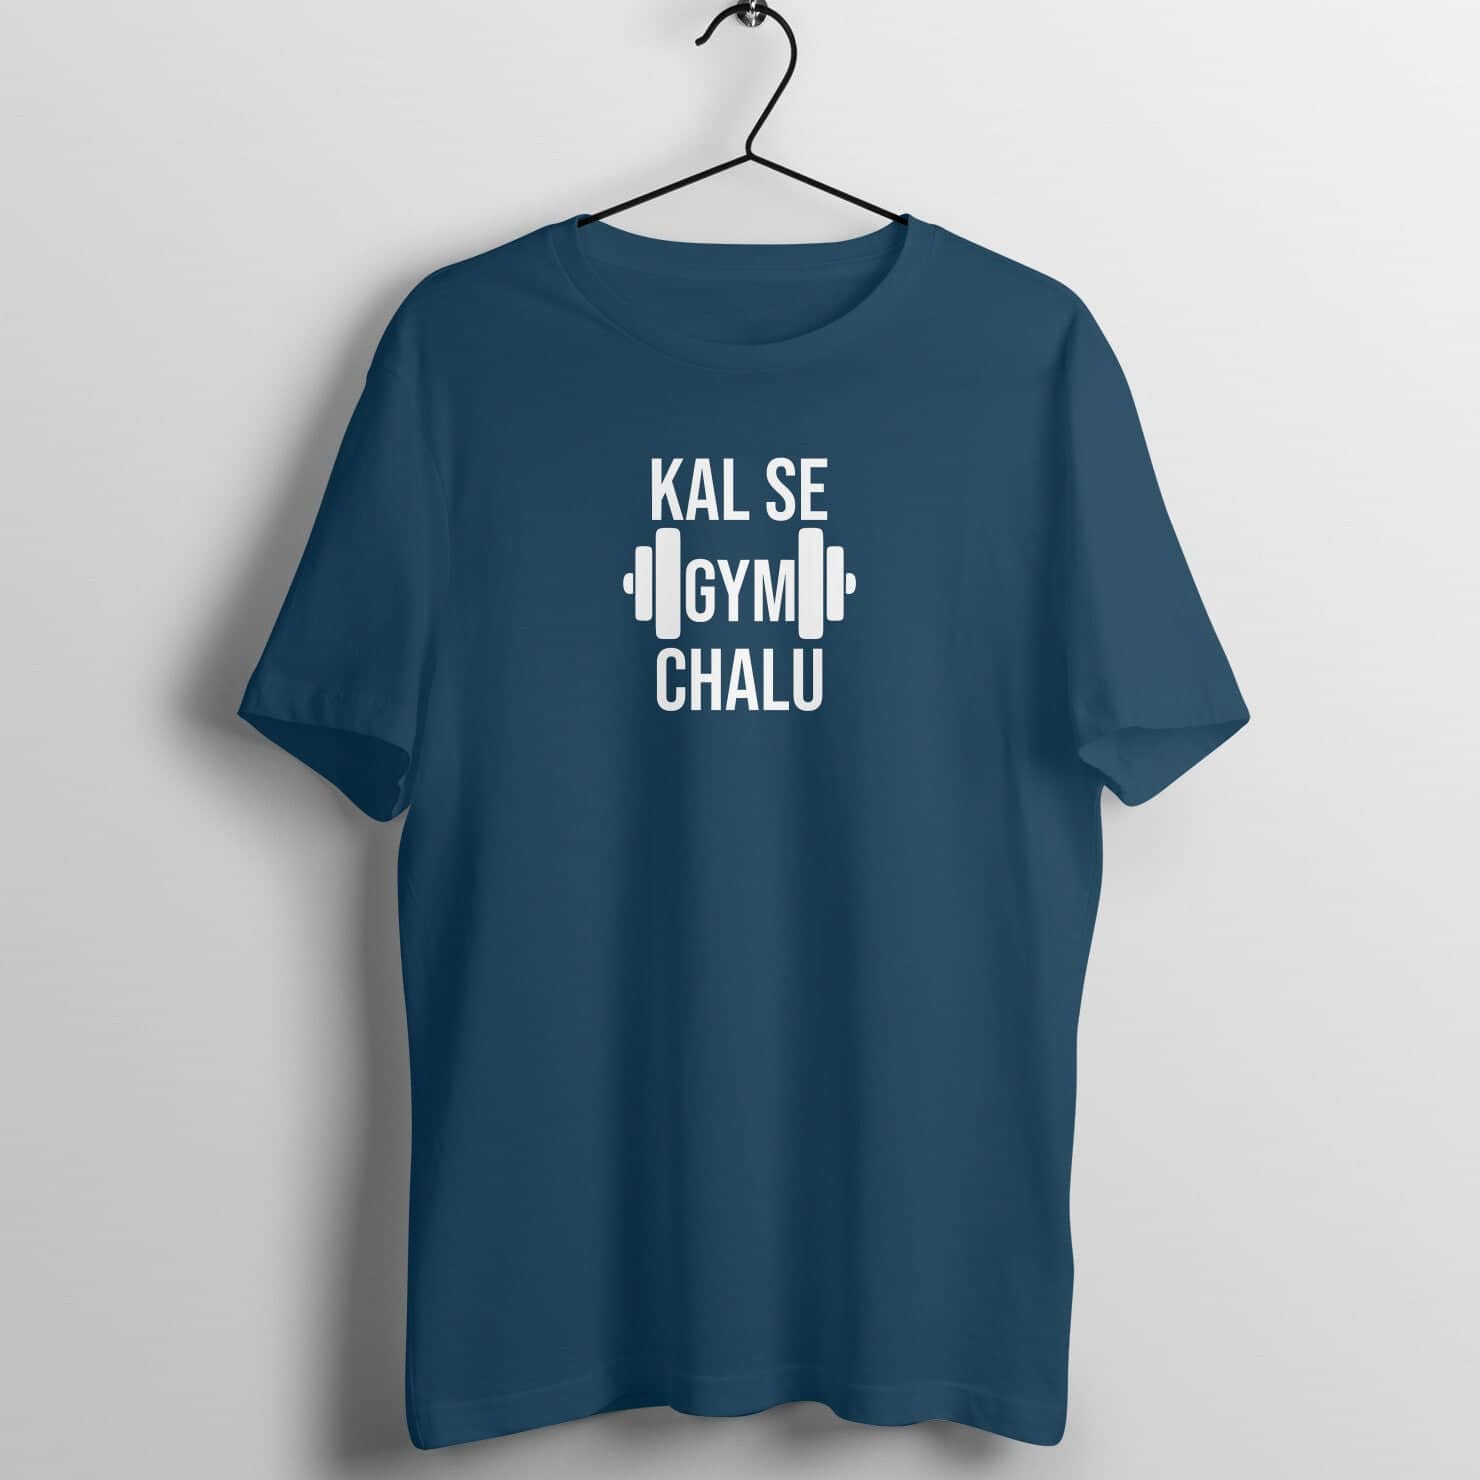 Kal Se Gym Chalu Exclusive Navy Blue T Shirt for Men and Women freeshipping - Catch My Drift India